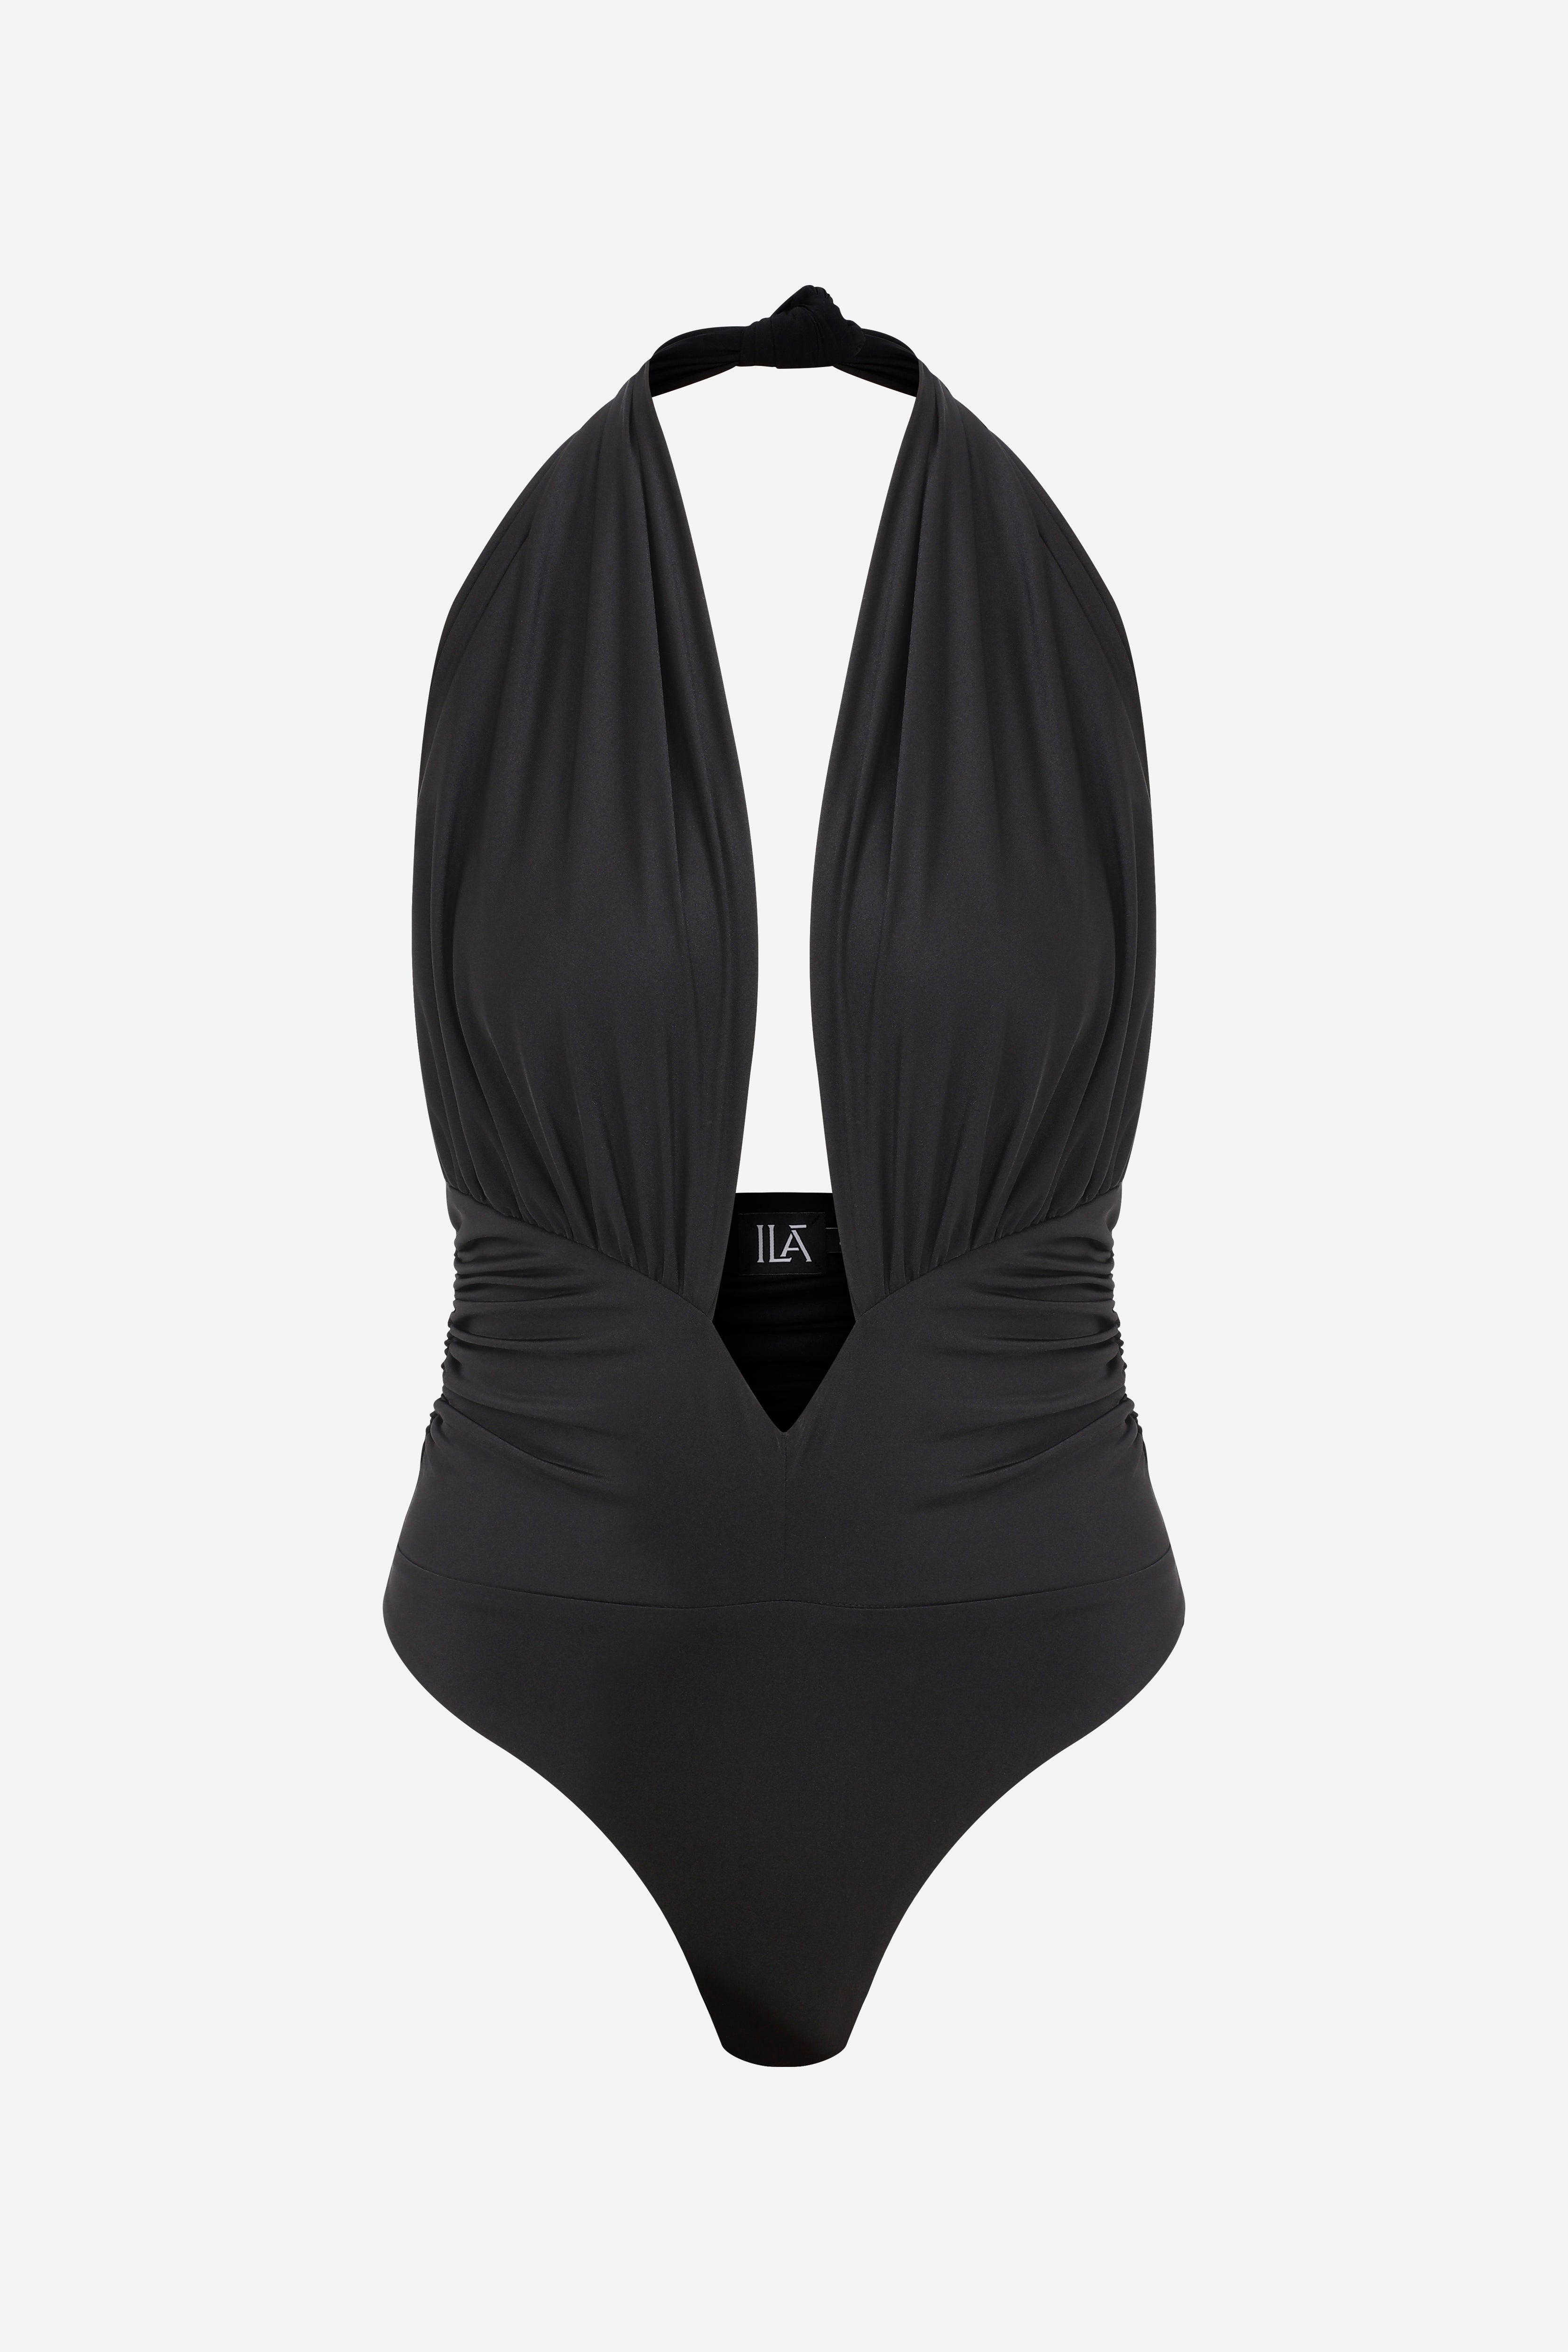 TRACY - JERSEY BODY WITH CUTOUT DETAILS in BLACK